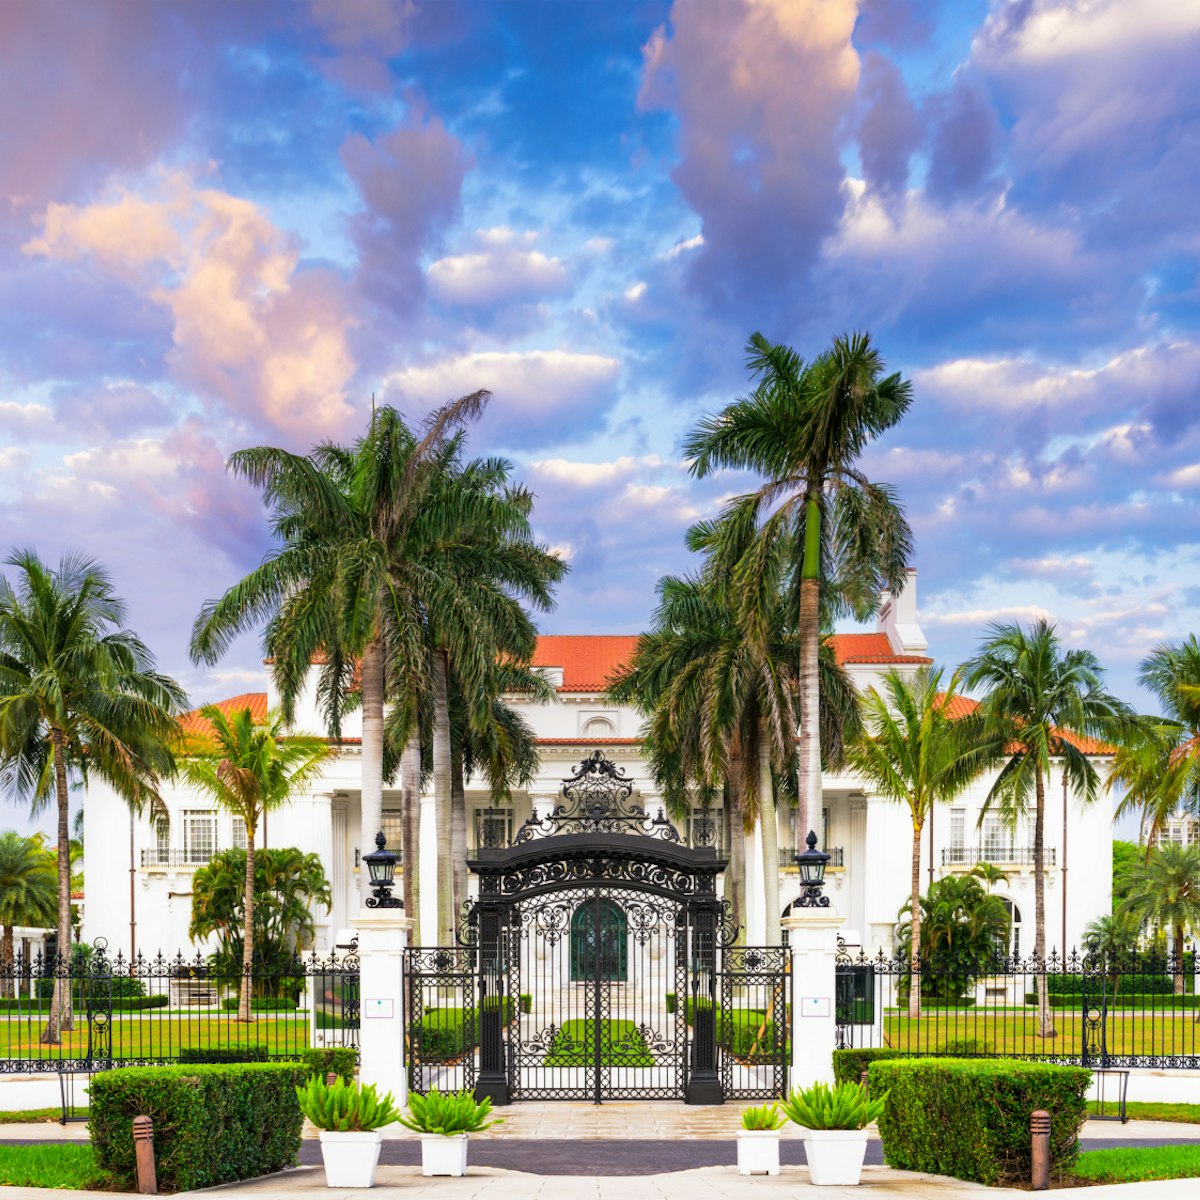 WEST PALM BEACH, FLORIDA - APRIL 4, 2016: The Flagler Museum exterior and grounds. The beaux arts mansion was constructed by Henry Flagler.; Shutterstock ID 402760483; Your name (First / Last): Lauren Keith; GL account no.: 65050; Netsuite department name: Content Asset; Full Product or Project name including edition: Guides Project Eastern USA